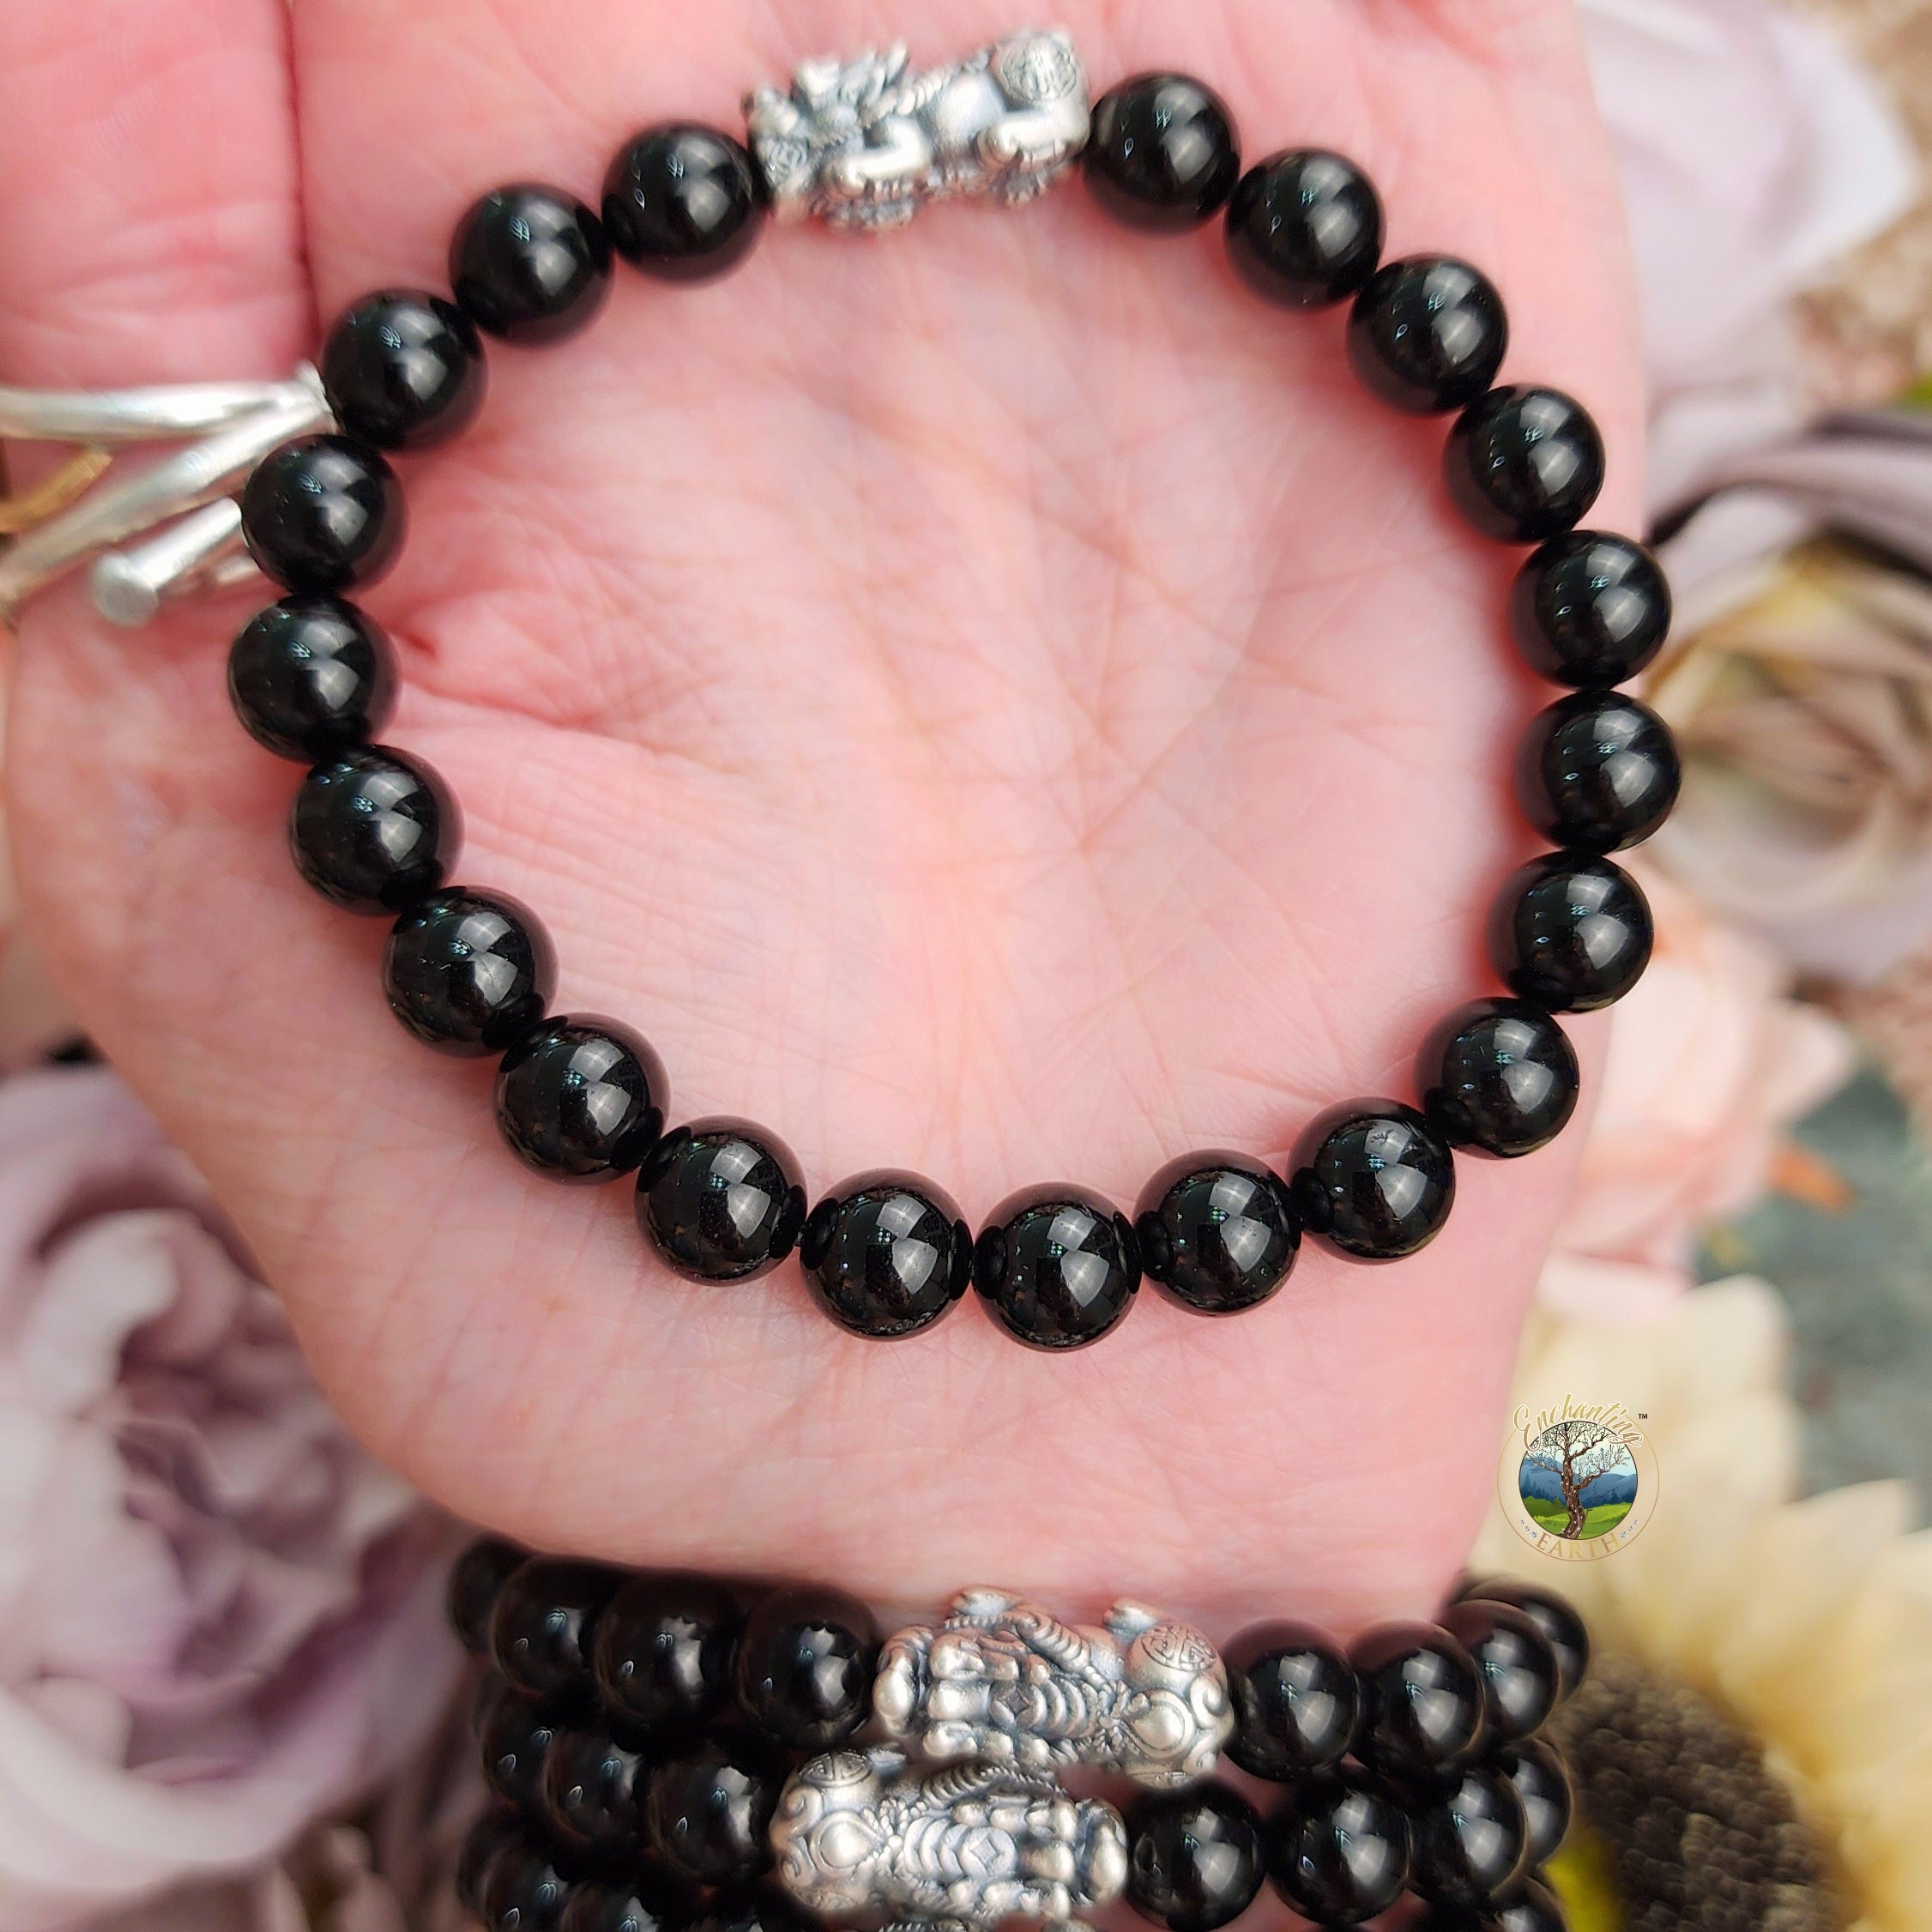 Black Tourmaline Silver Pixiu Bracelet for Good Luck, Protection and Wealth